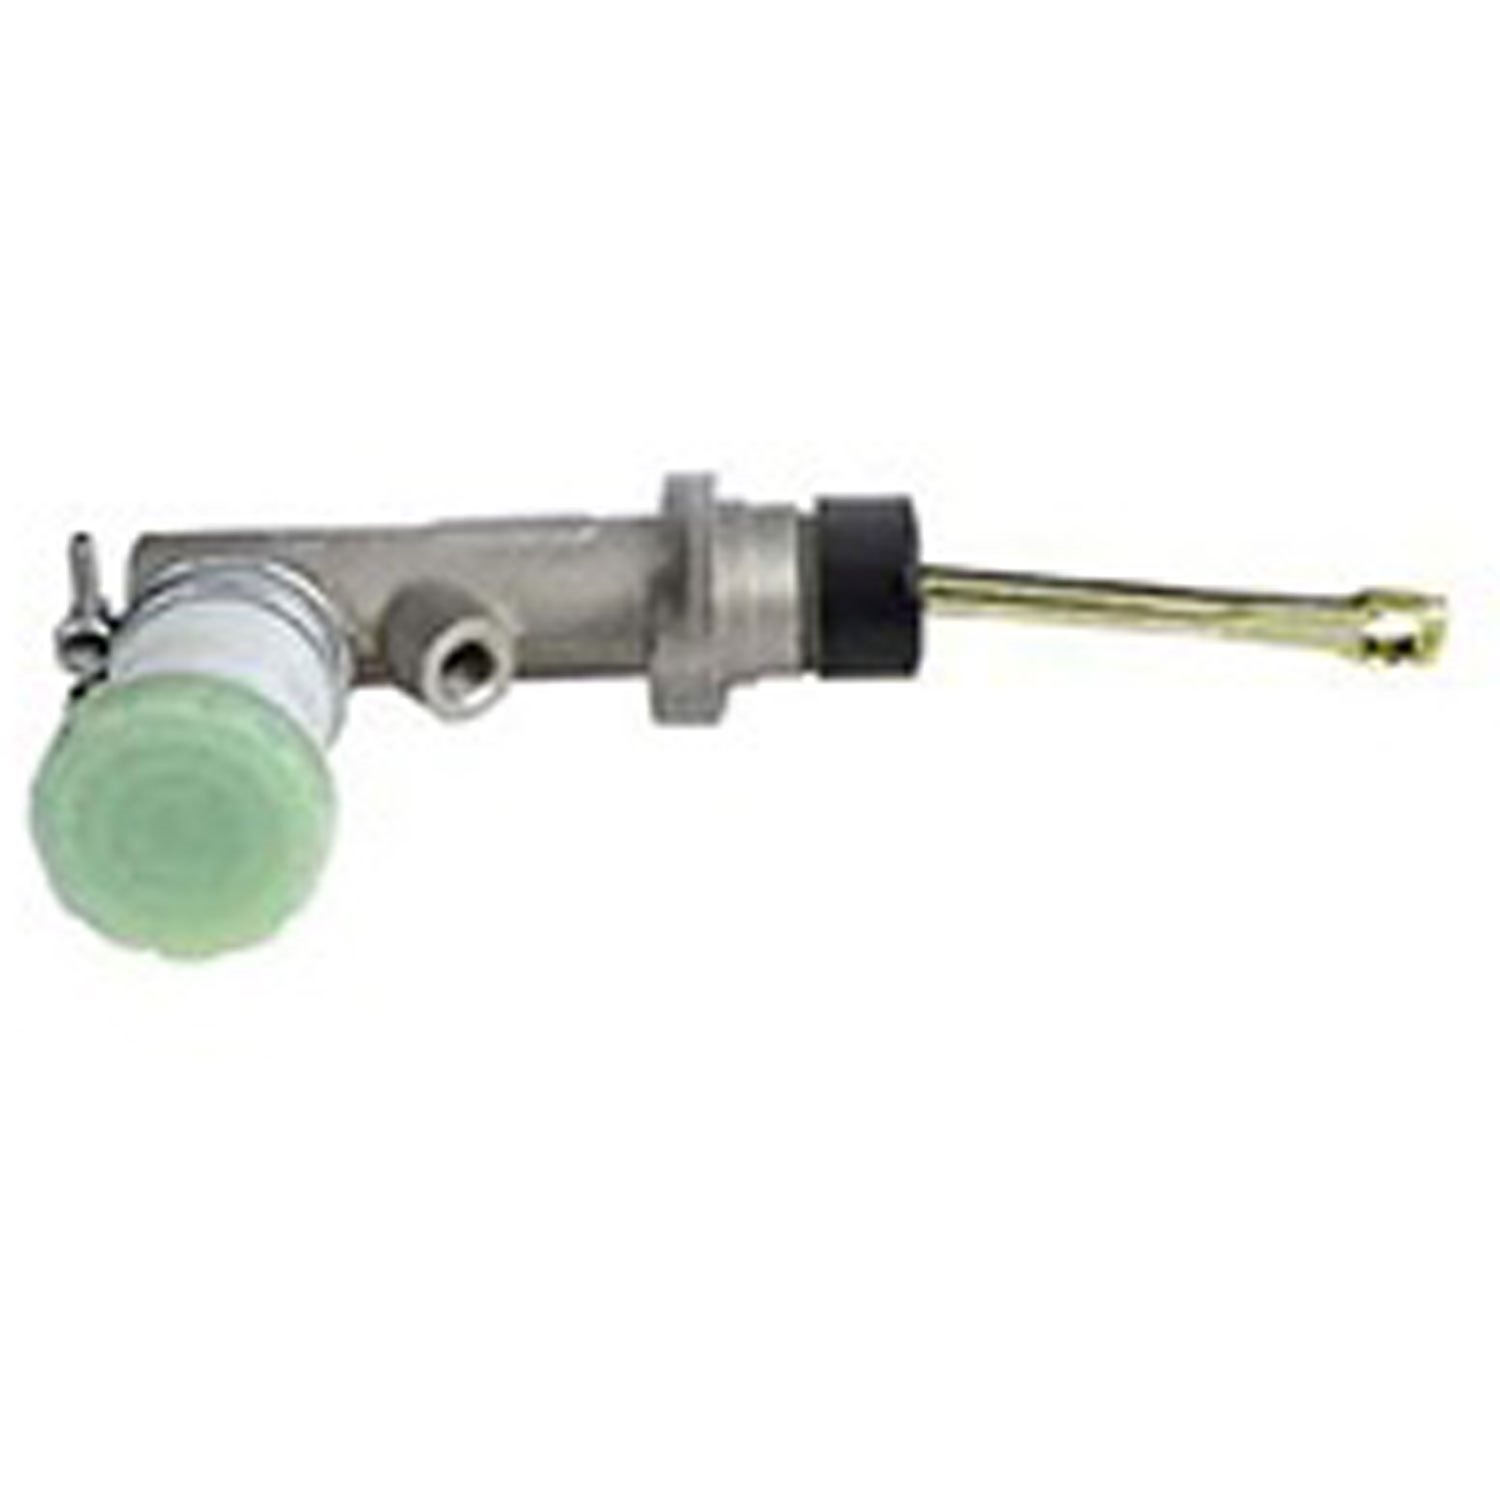 Replacement clutch master cylinder from Omix-ADA, Fits 87-90 Jeep Cherokee XJ